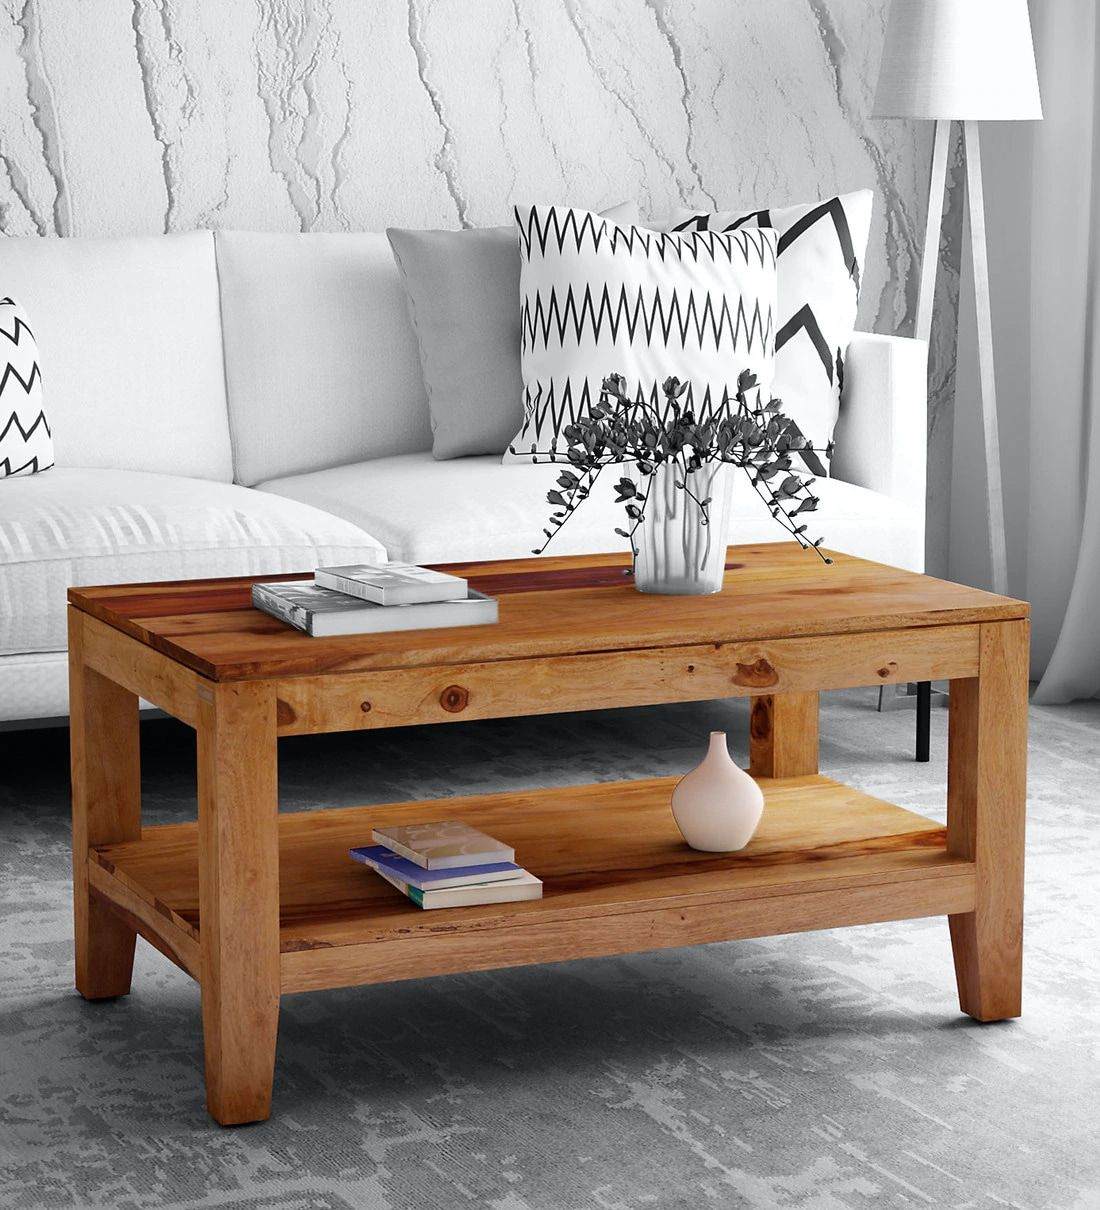 Buy Anitz Solid Wood Coffee Table In Warm Walnut Finishwoodsworth  Online – Contemporary Rectangular Coffee Tables – Tables – Furniture –  Pepperfry Product Intended For Warm Walnut Coffee Tables (View 2 of 20)